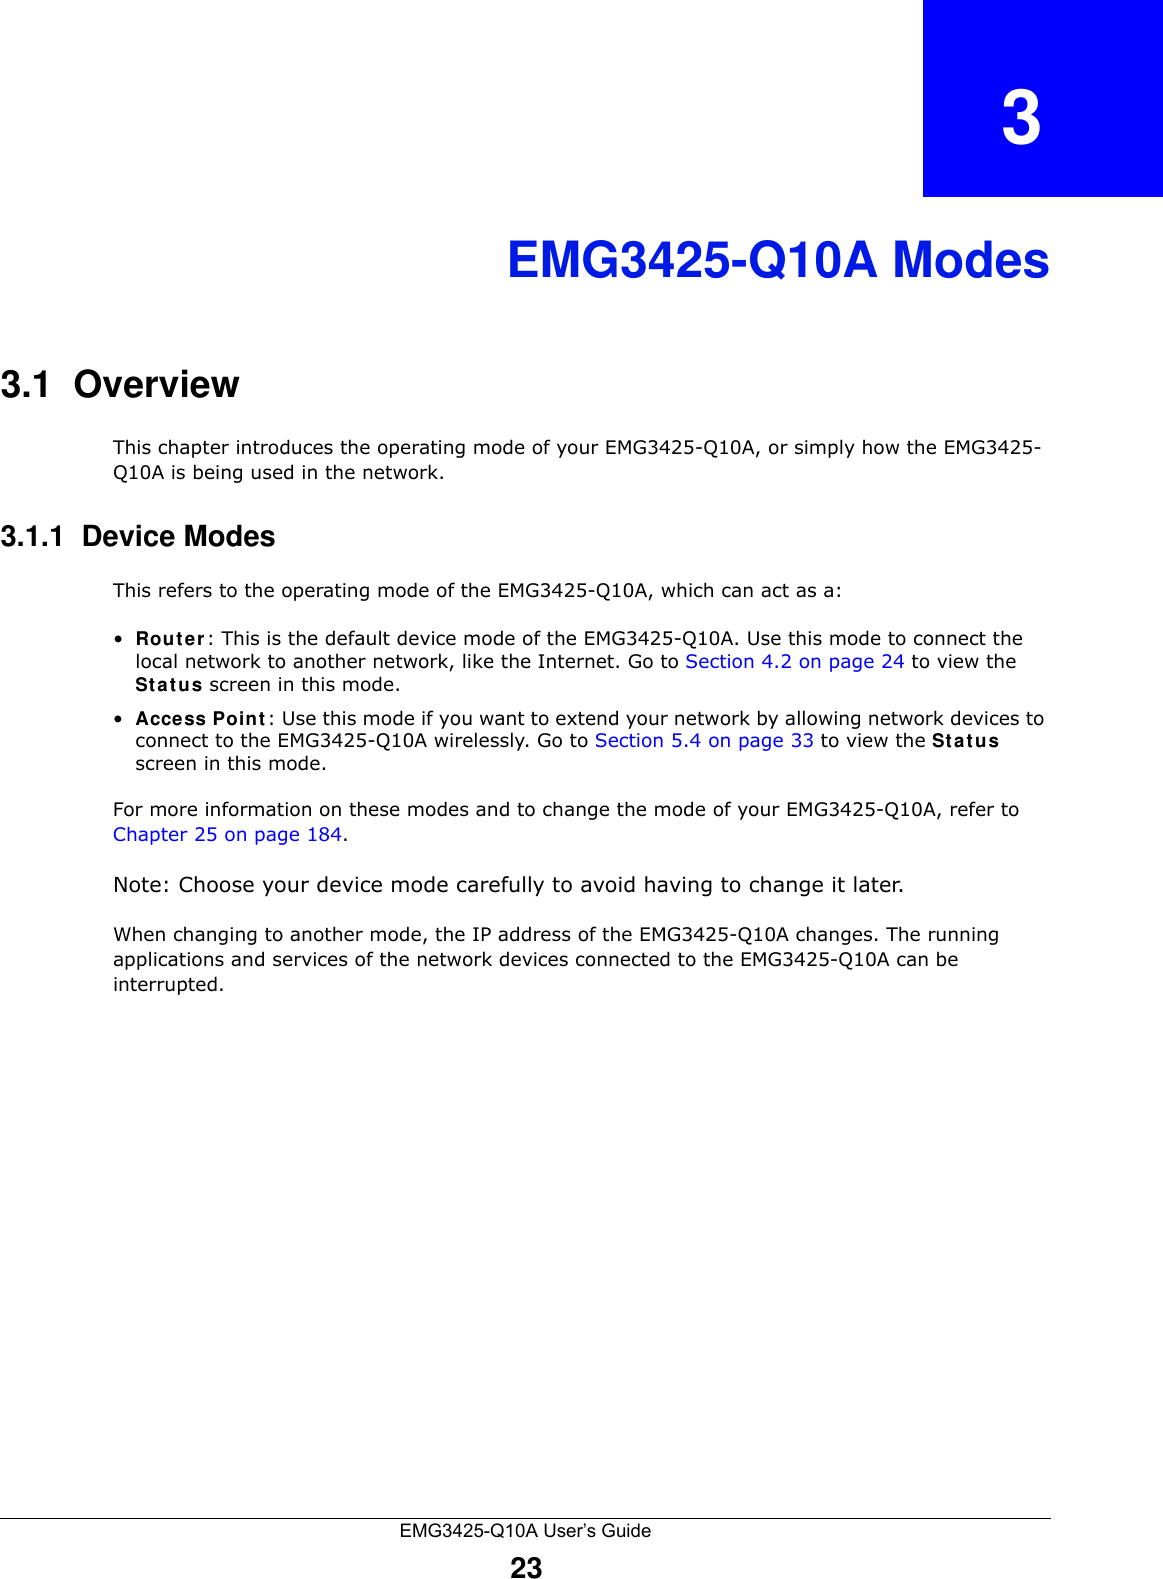 EMG3425-Q10A User’s Guide23CHAPTER   3EMG3425-Q10A Modes3.1  OverviewThis chapter introduces the operating mode of your EMG3425-Q10A, or simply how the EMG3425-Q10A is being used in the network. 3.1.1  Device ModesThis refers to the operating mode of the EMG3425-Q10A, which can act as a:•Rout er : This is the default device mode of the EMG3425-Q10A. Use this mode to connect the local network to another network, like the Internet. Go to Section 4.2 on page 24 to view the St a t us screen in this mode.•Acce ss Point : Use this mode if you want to extend your network by allowing network devices to connect to the EMG3425-Q10A wirelessly. Go to Section 5.4 on page 33 to view the St a t us screen in this mode.For more information on these modes and to change the mode of your EMG3425-Q10A, refer to Chapter 25 on page 184.Note: Choose your device mode carefully to avoid having to change it later.When changing to another mode, the IP address of the EMG3425-Q10A changes. The running applications and services of the network devices connected to the EMG3425-Q10A can be interrupted. 